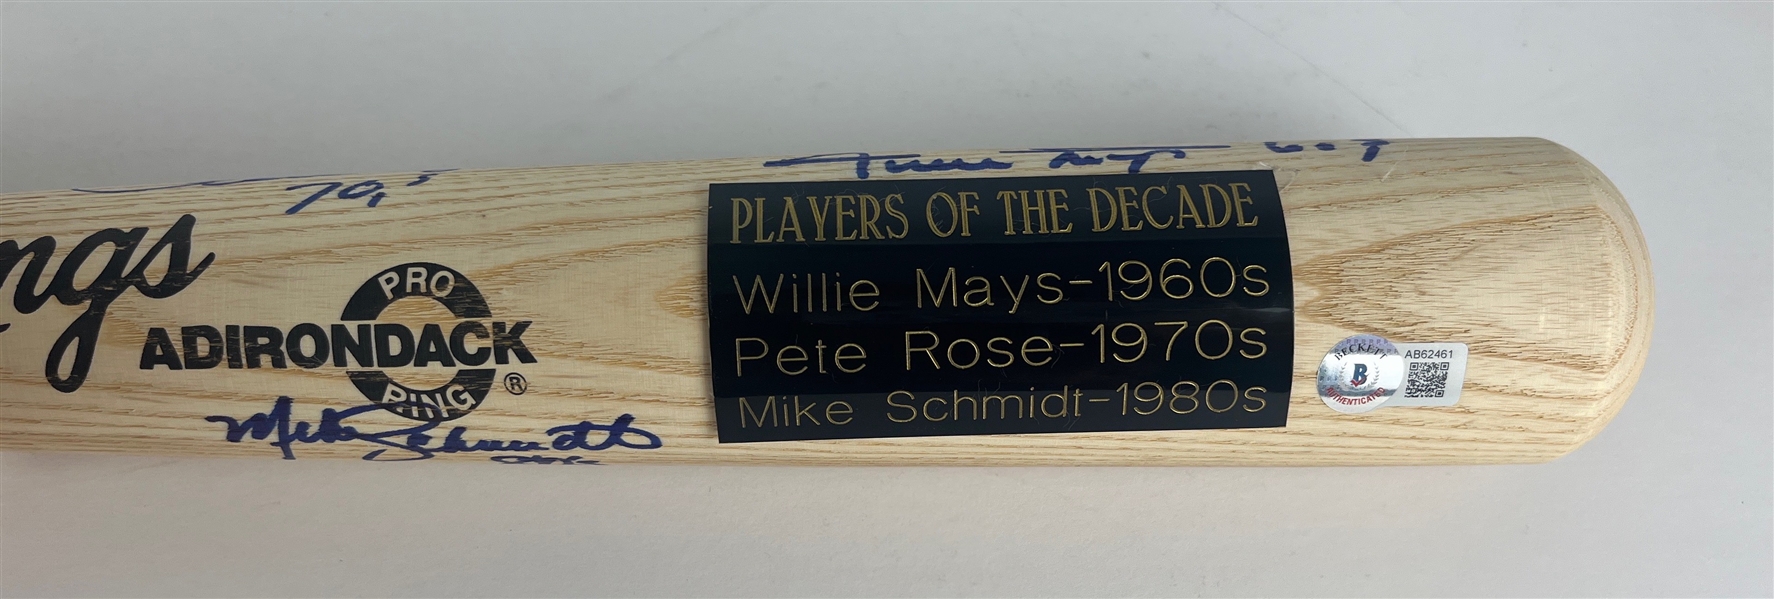 Mays, Rose, & Schmidt Signed 'Players of the Decade' Commemorative Bat (Beckett/BAS)